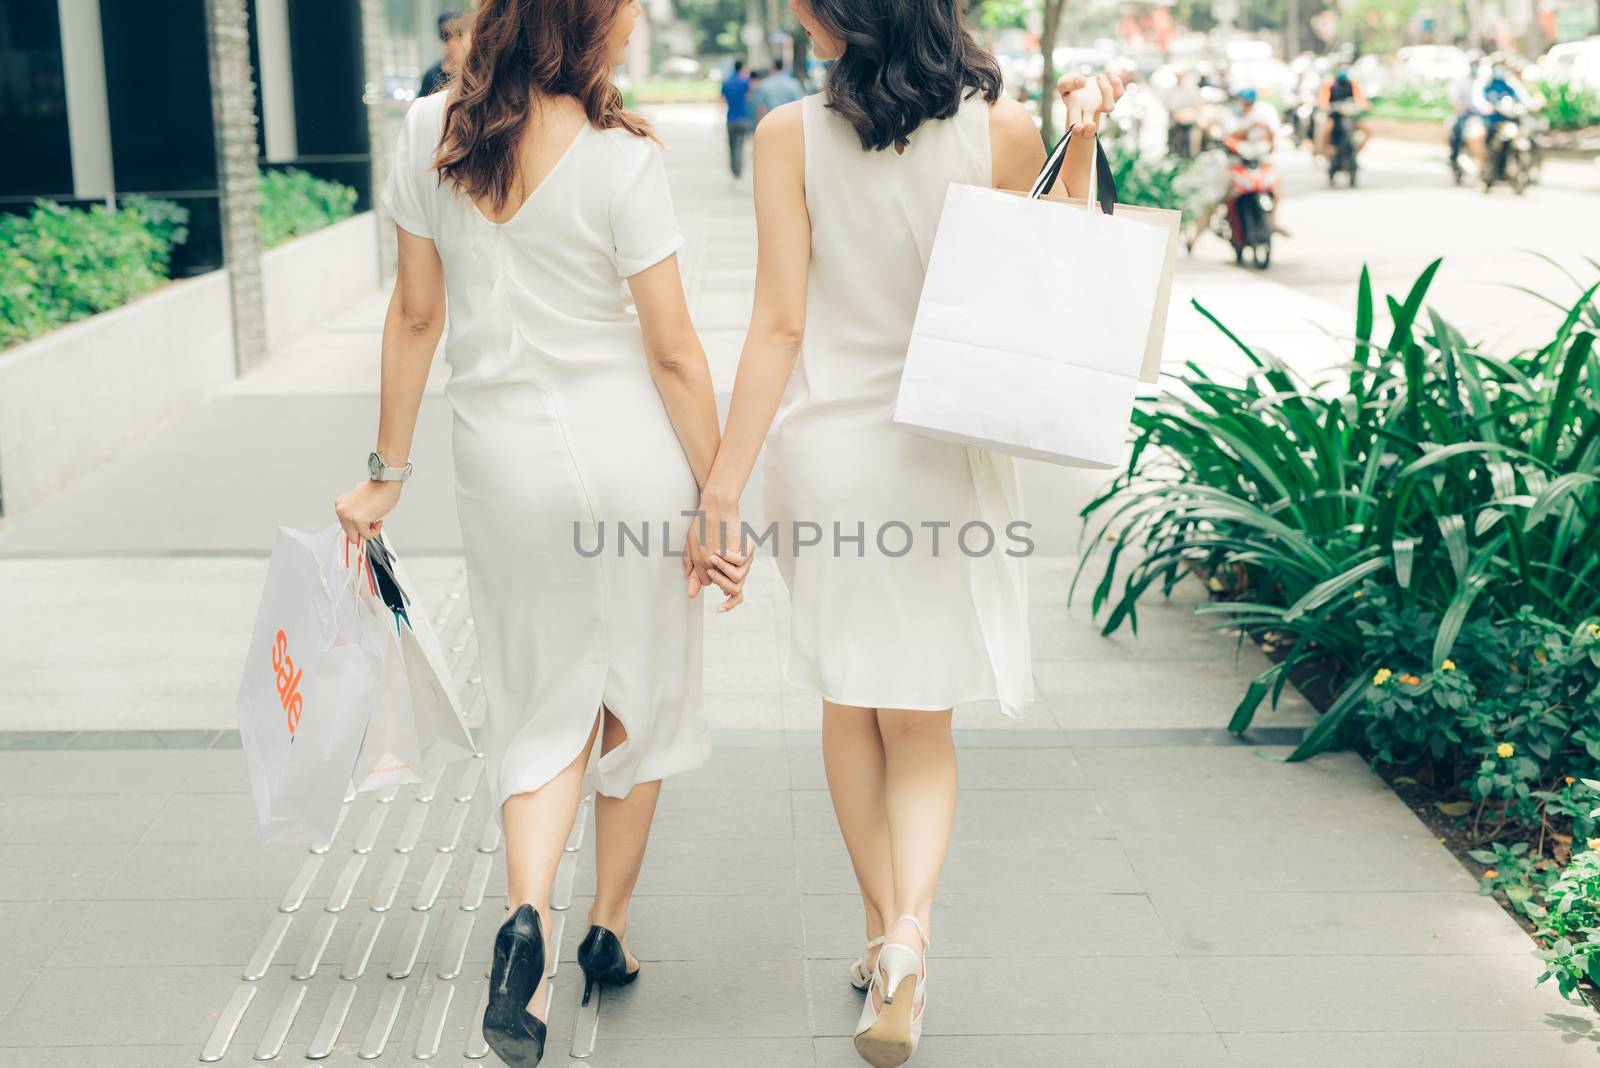 Beautiful asian girls with shopping bags walking on street at th by makidotvn